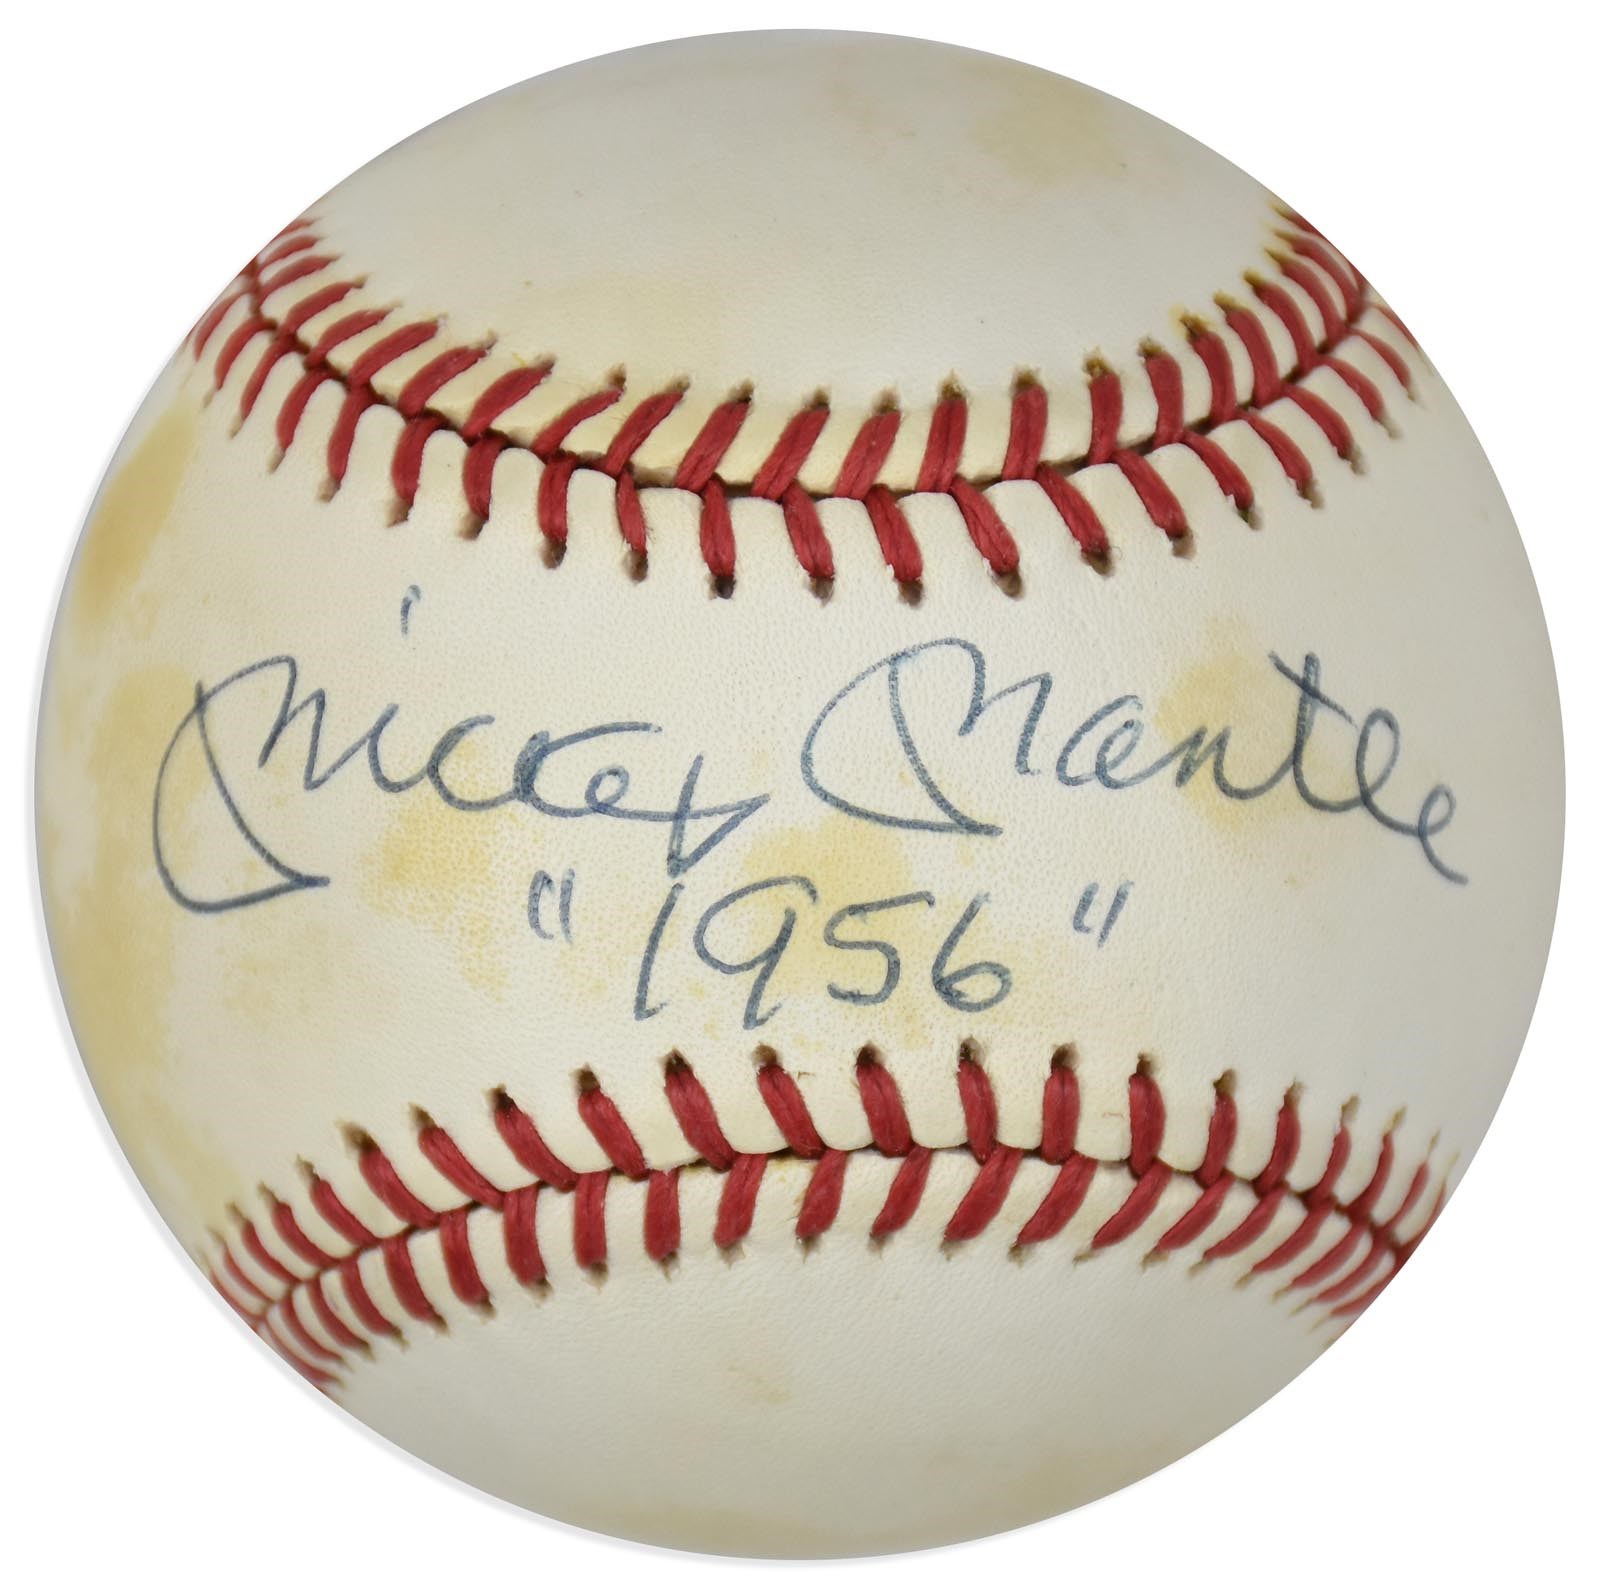 Kubina And The Mick - Mickey Mantle "1956" Signed & Inscribed Baseball from 1990's Promotion (PSA)